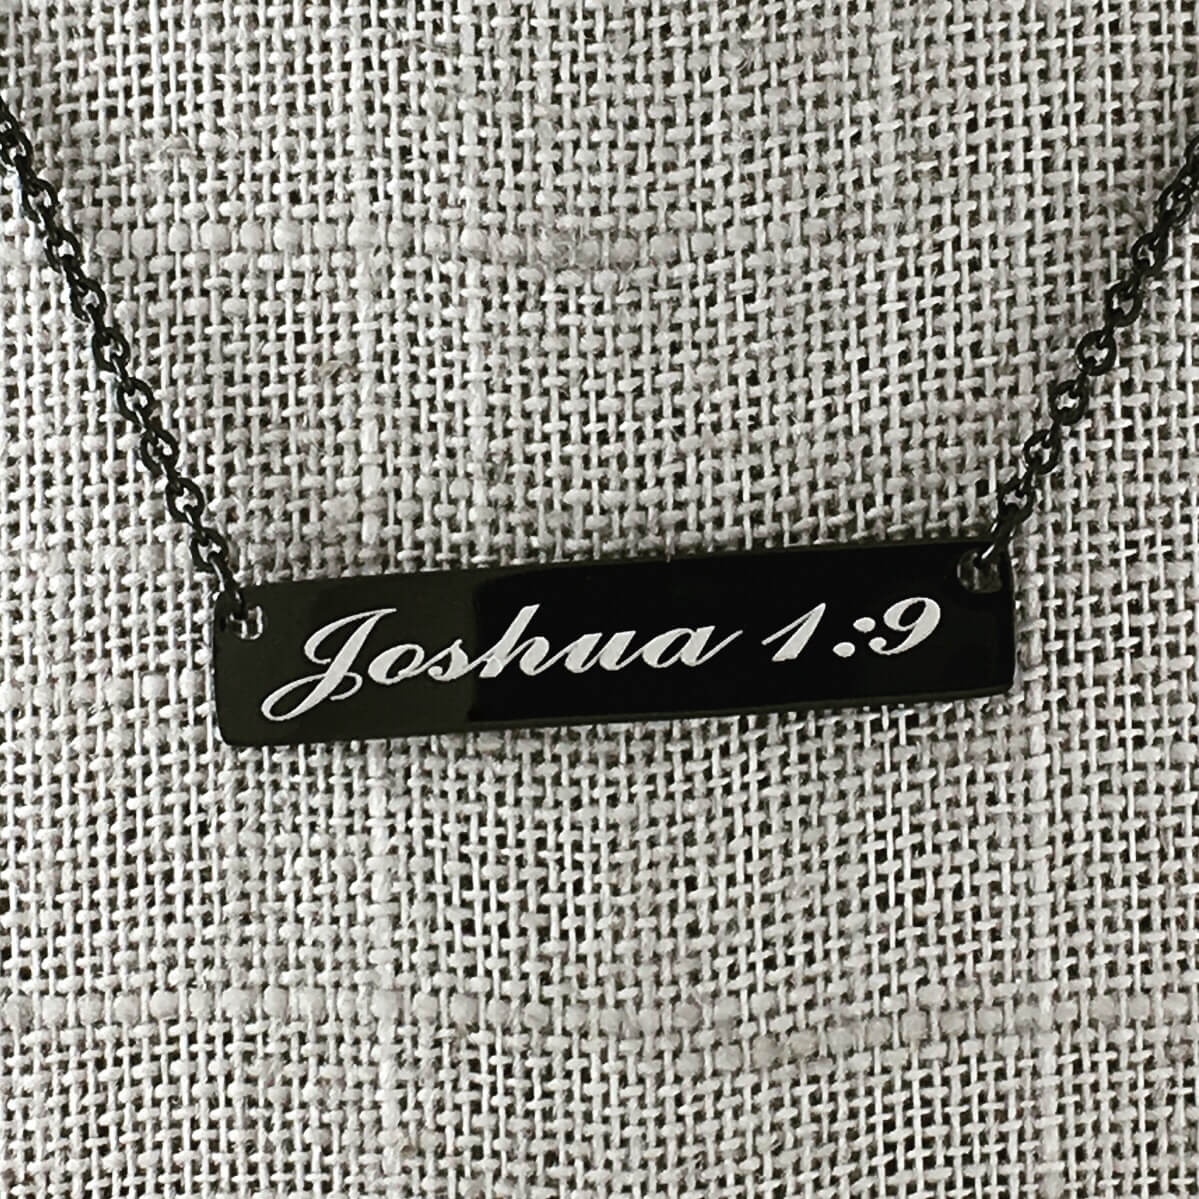 Bar pendant necklace with Joshua 1:9 engraved.  Textured cloth background